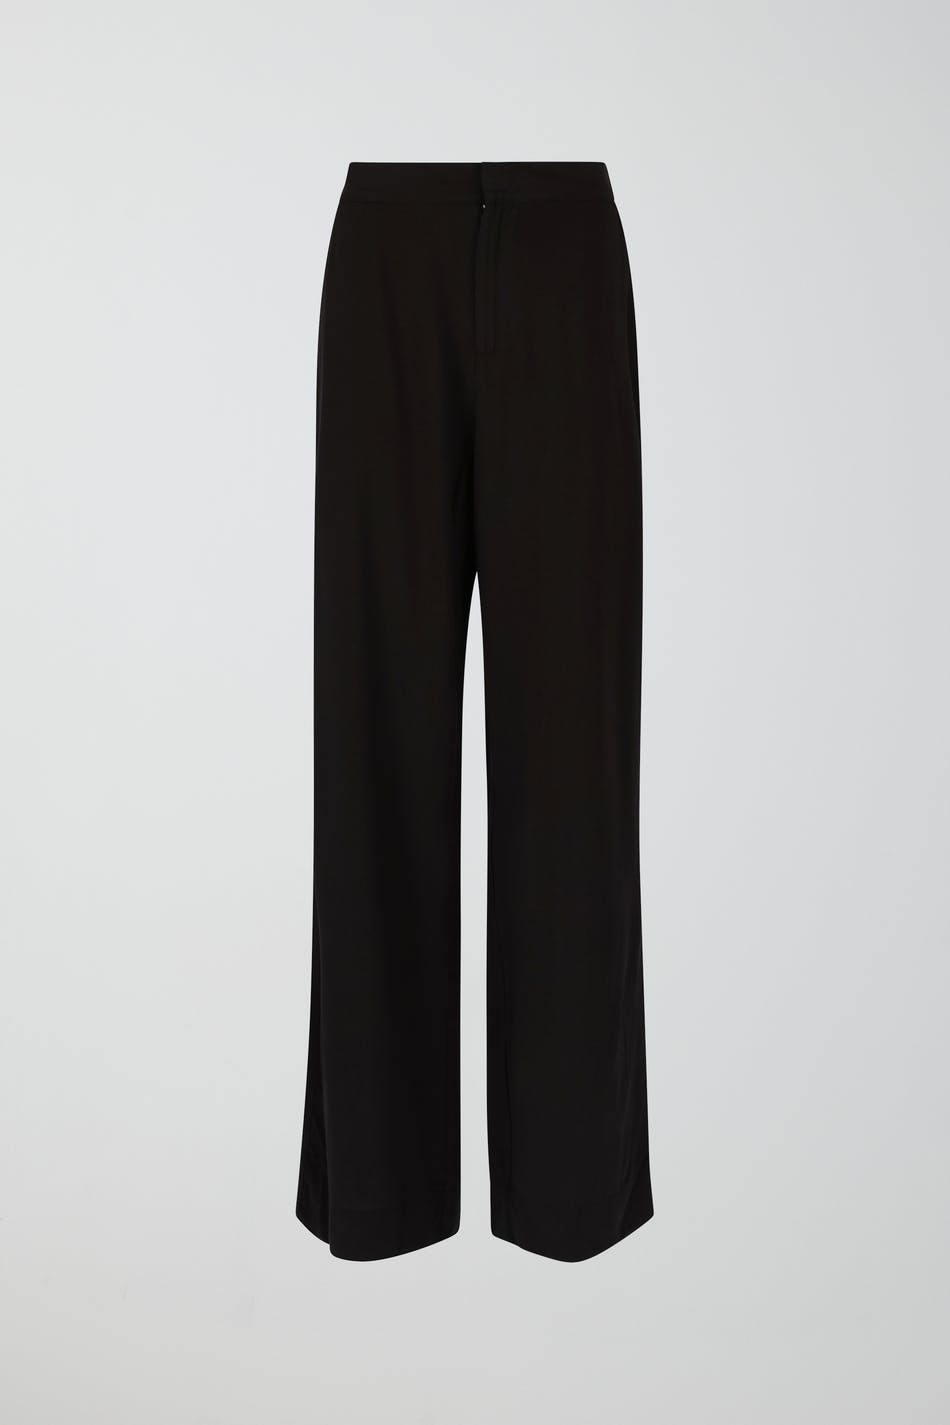 Läs mer om Relaxed petite viscose trousers